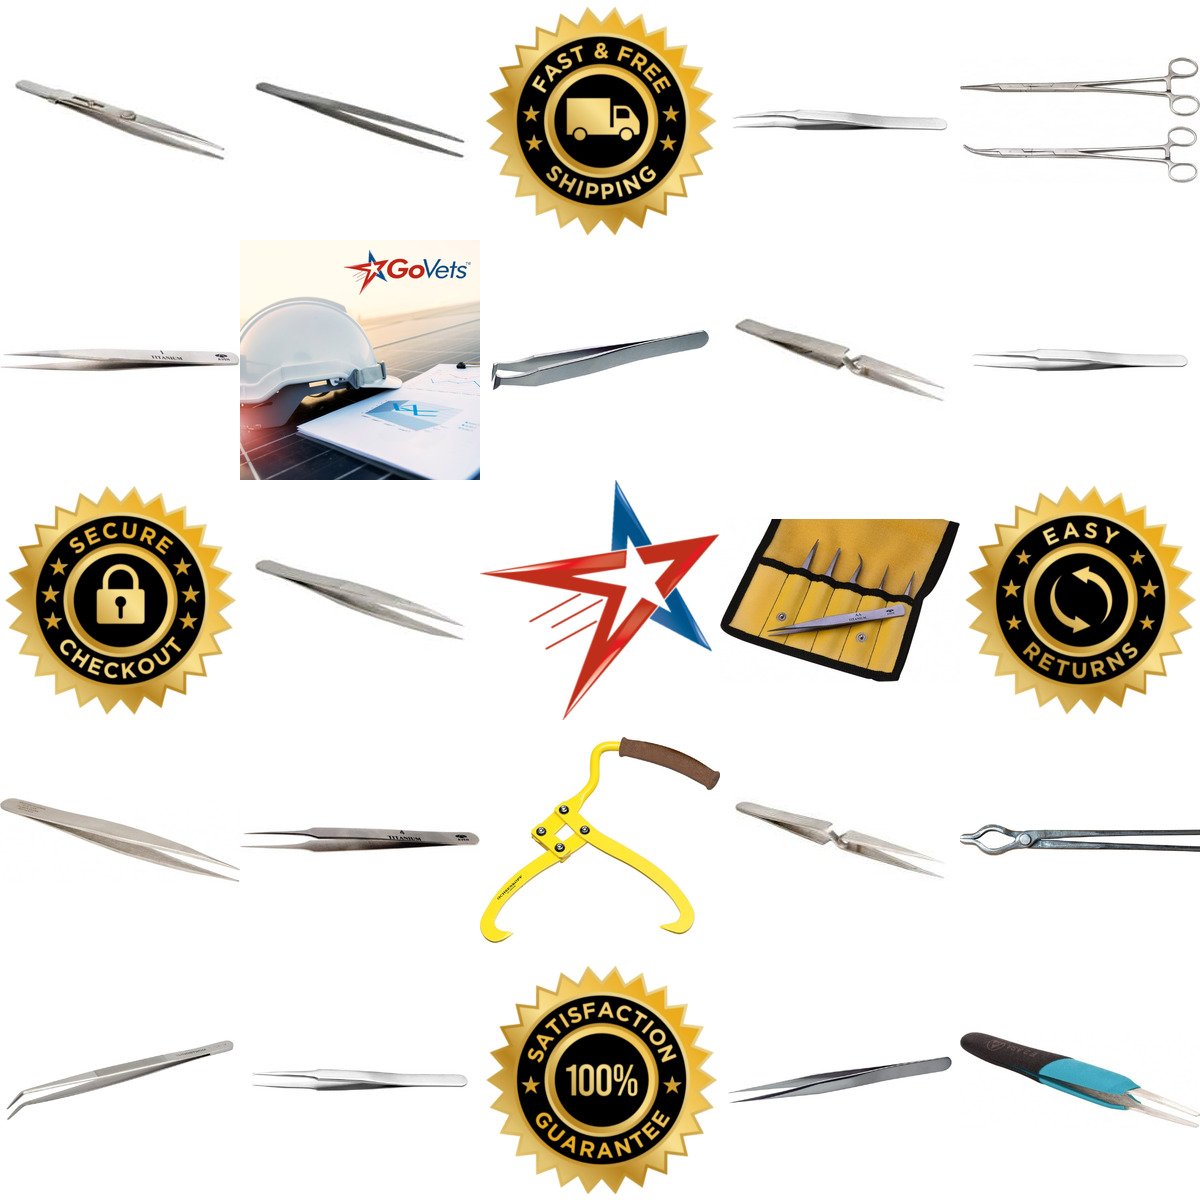 A selection of Tweezers and Tongs products on GoVets